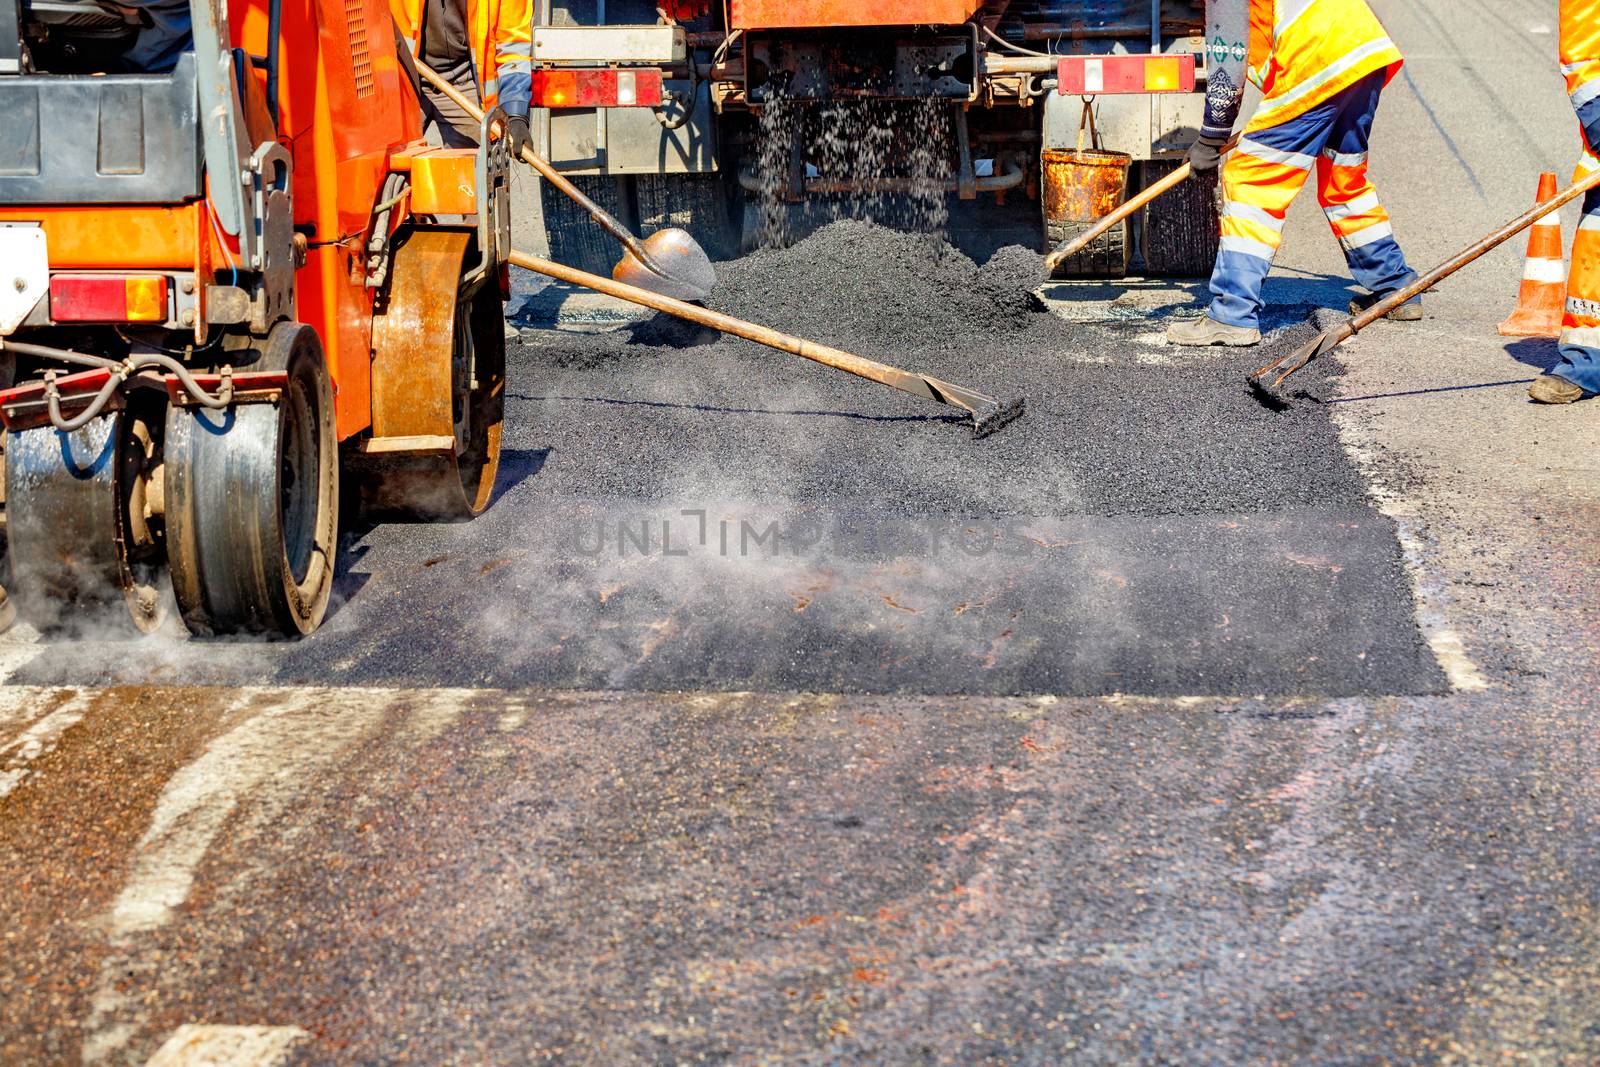 A team of road workers in protective orange overalls repairs a section of the road using shovels, levels and small road equipment, copy space.